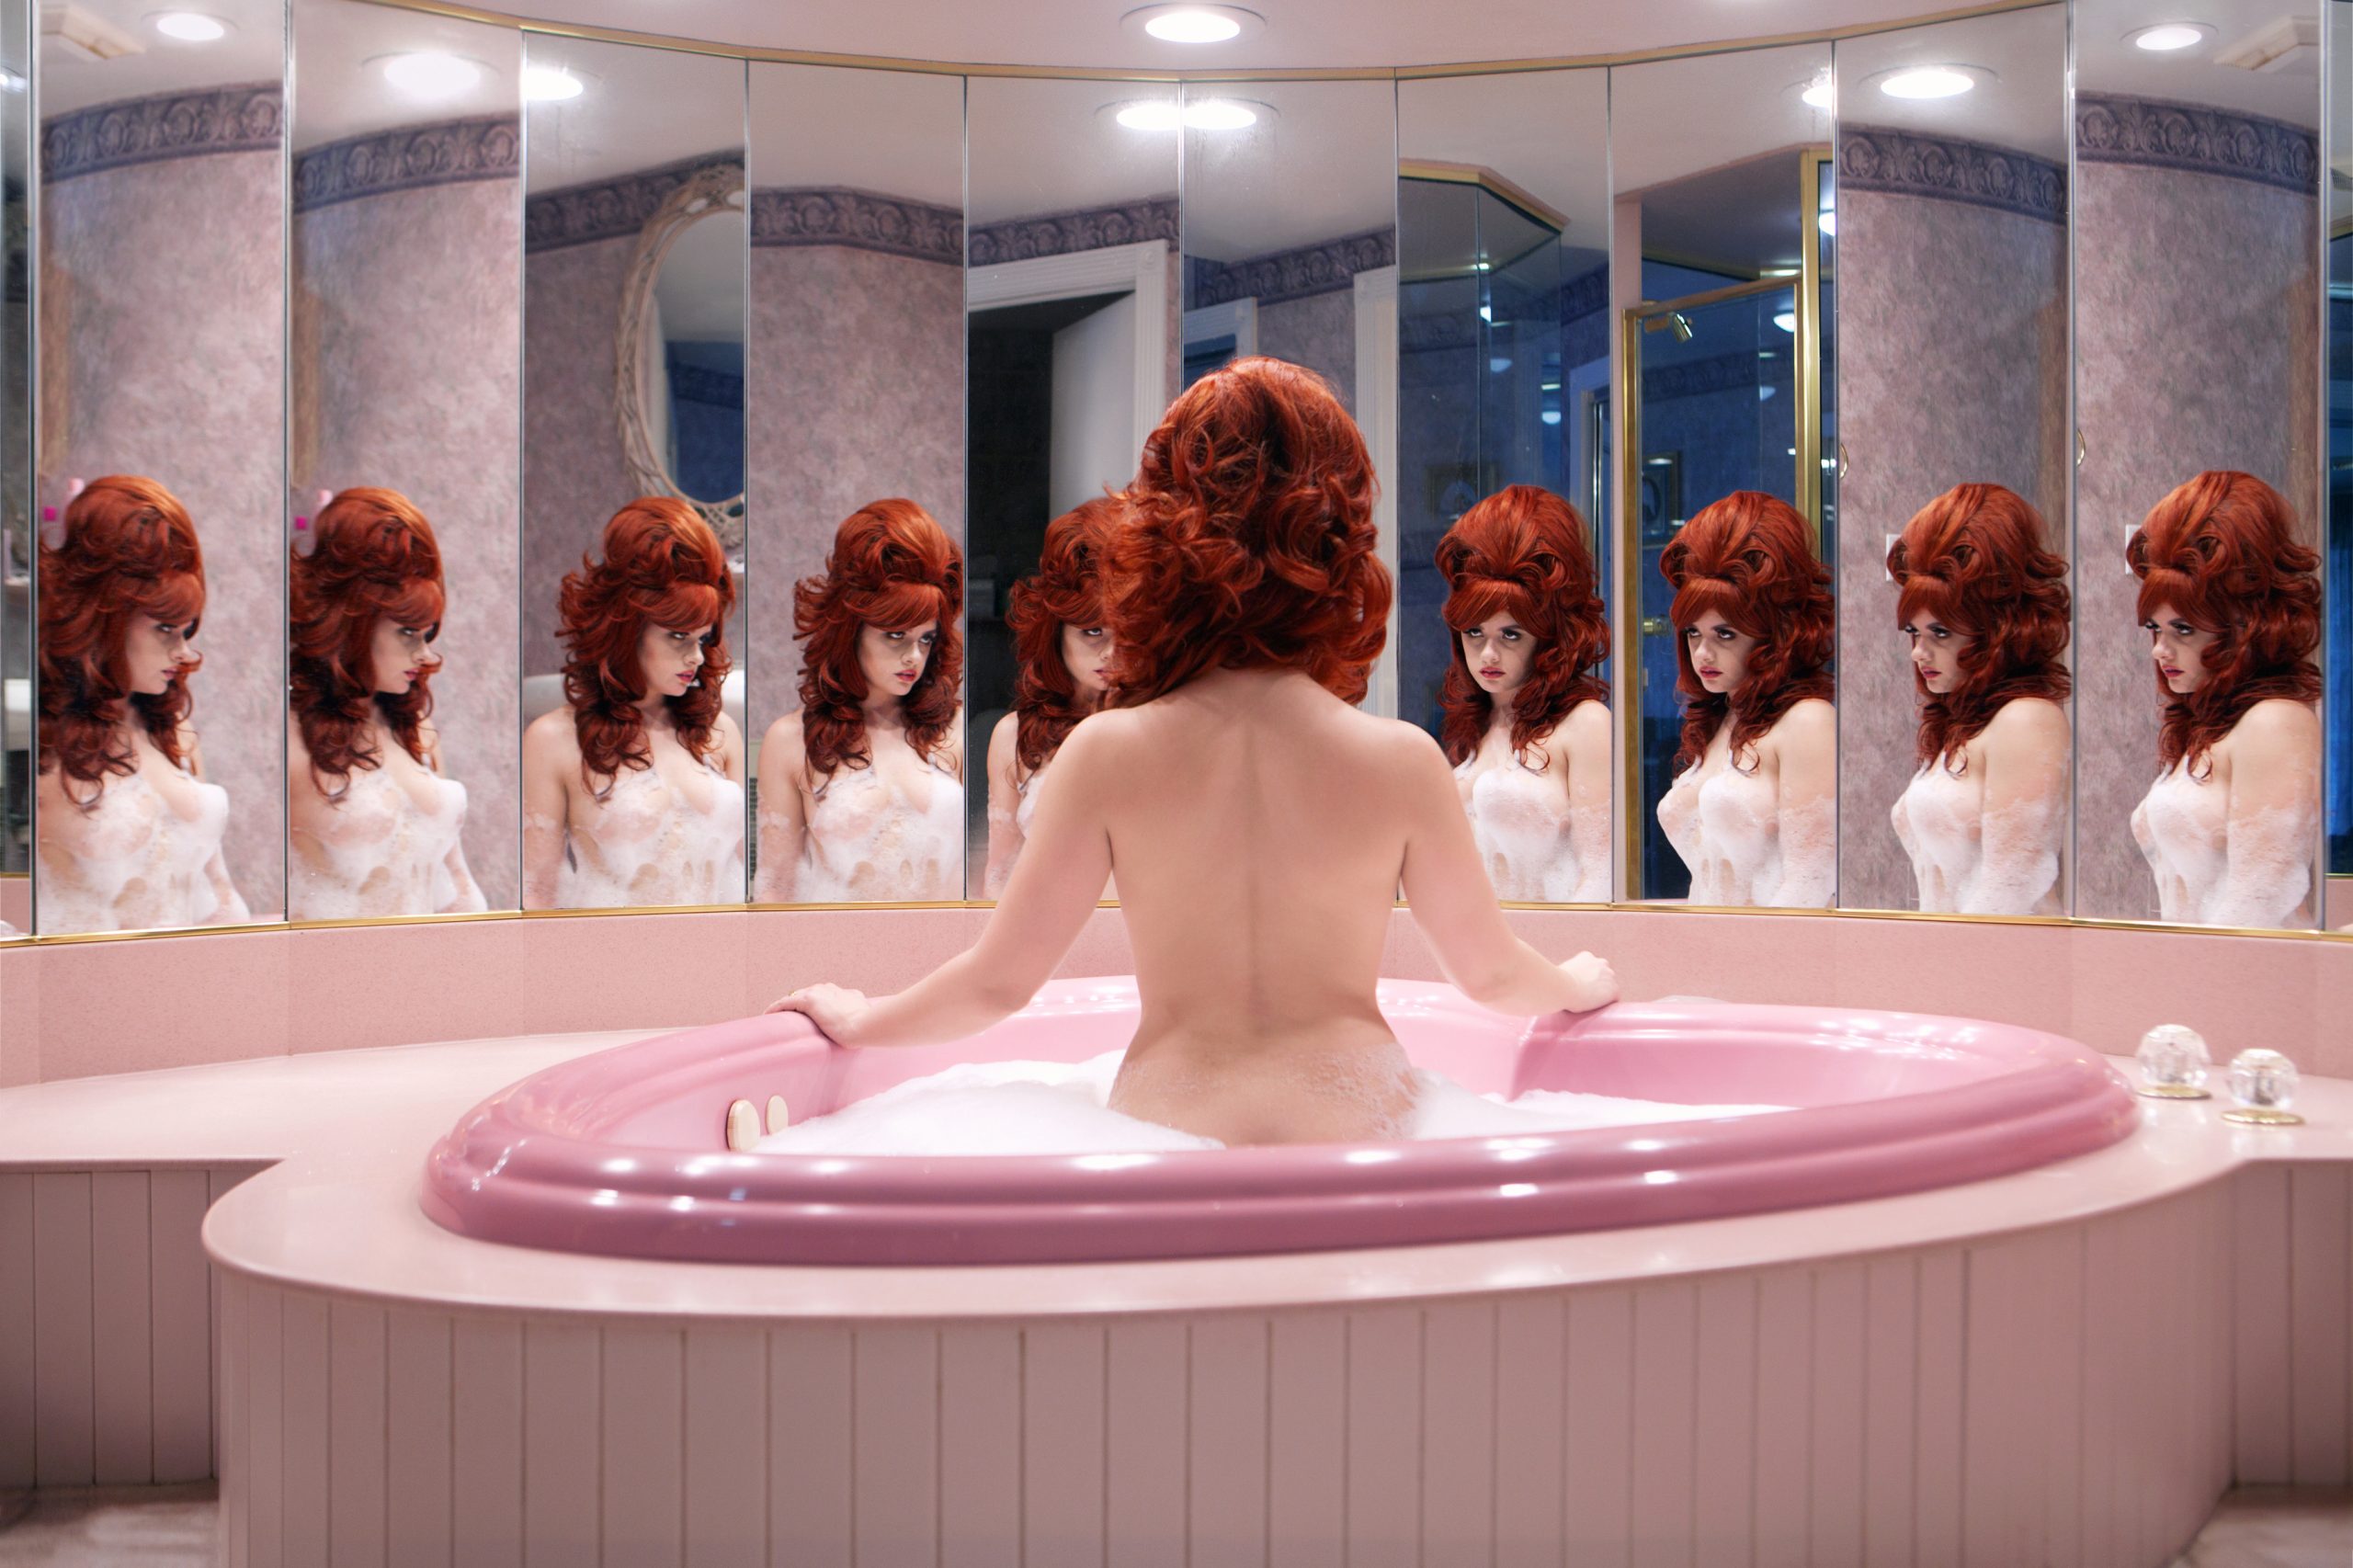 Honeymoon Suite, 2015 © Juno Calypso / Image courtesy of the artist and TJ Boulting Gallery